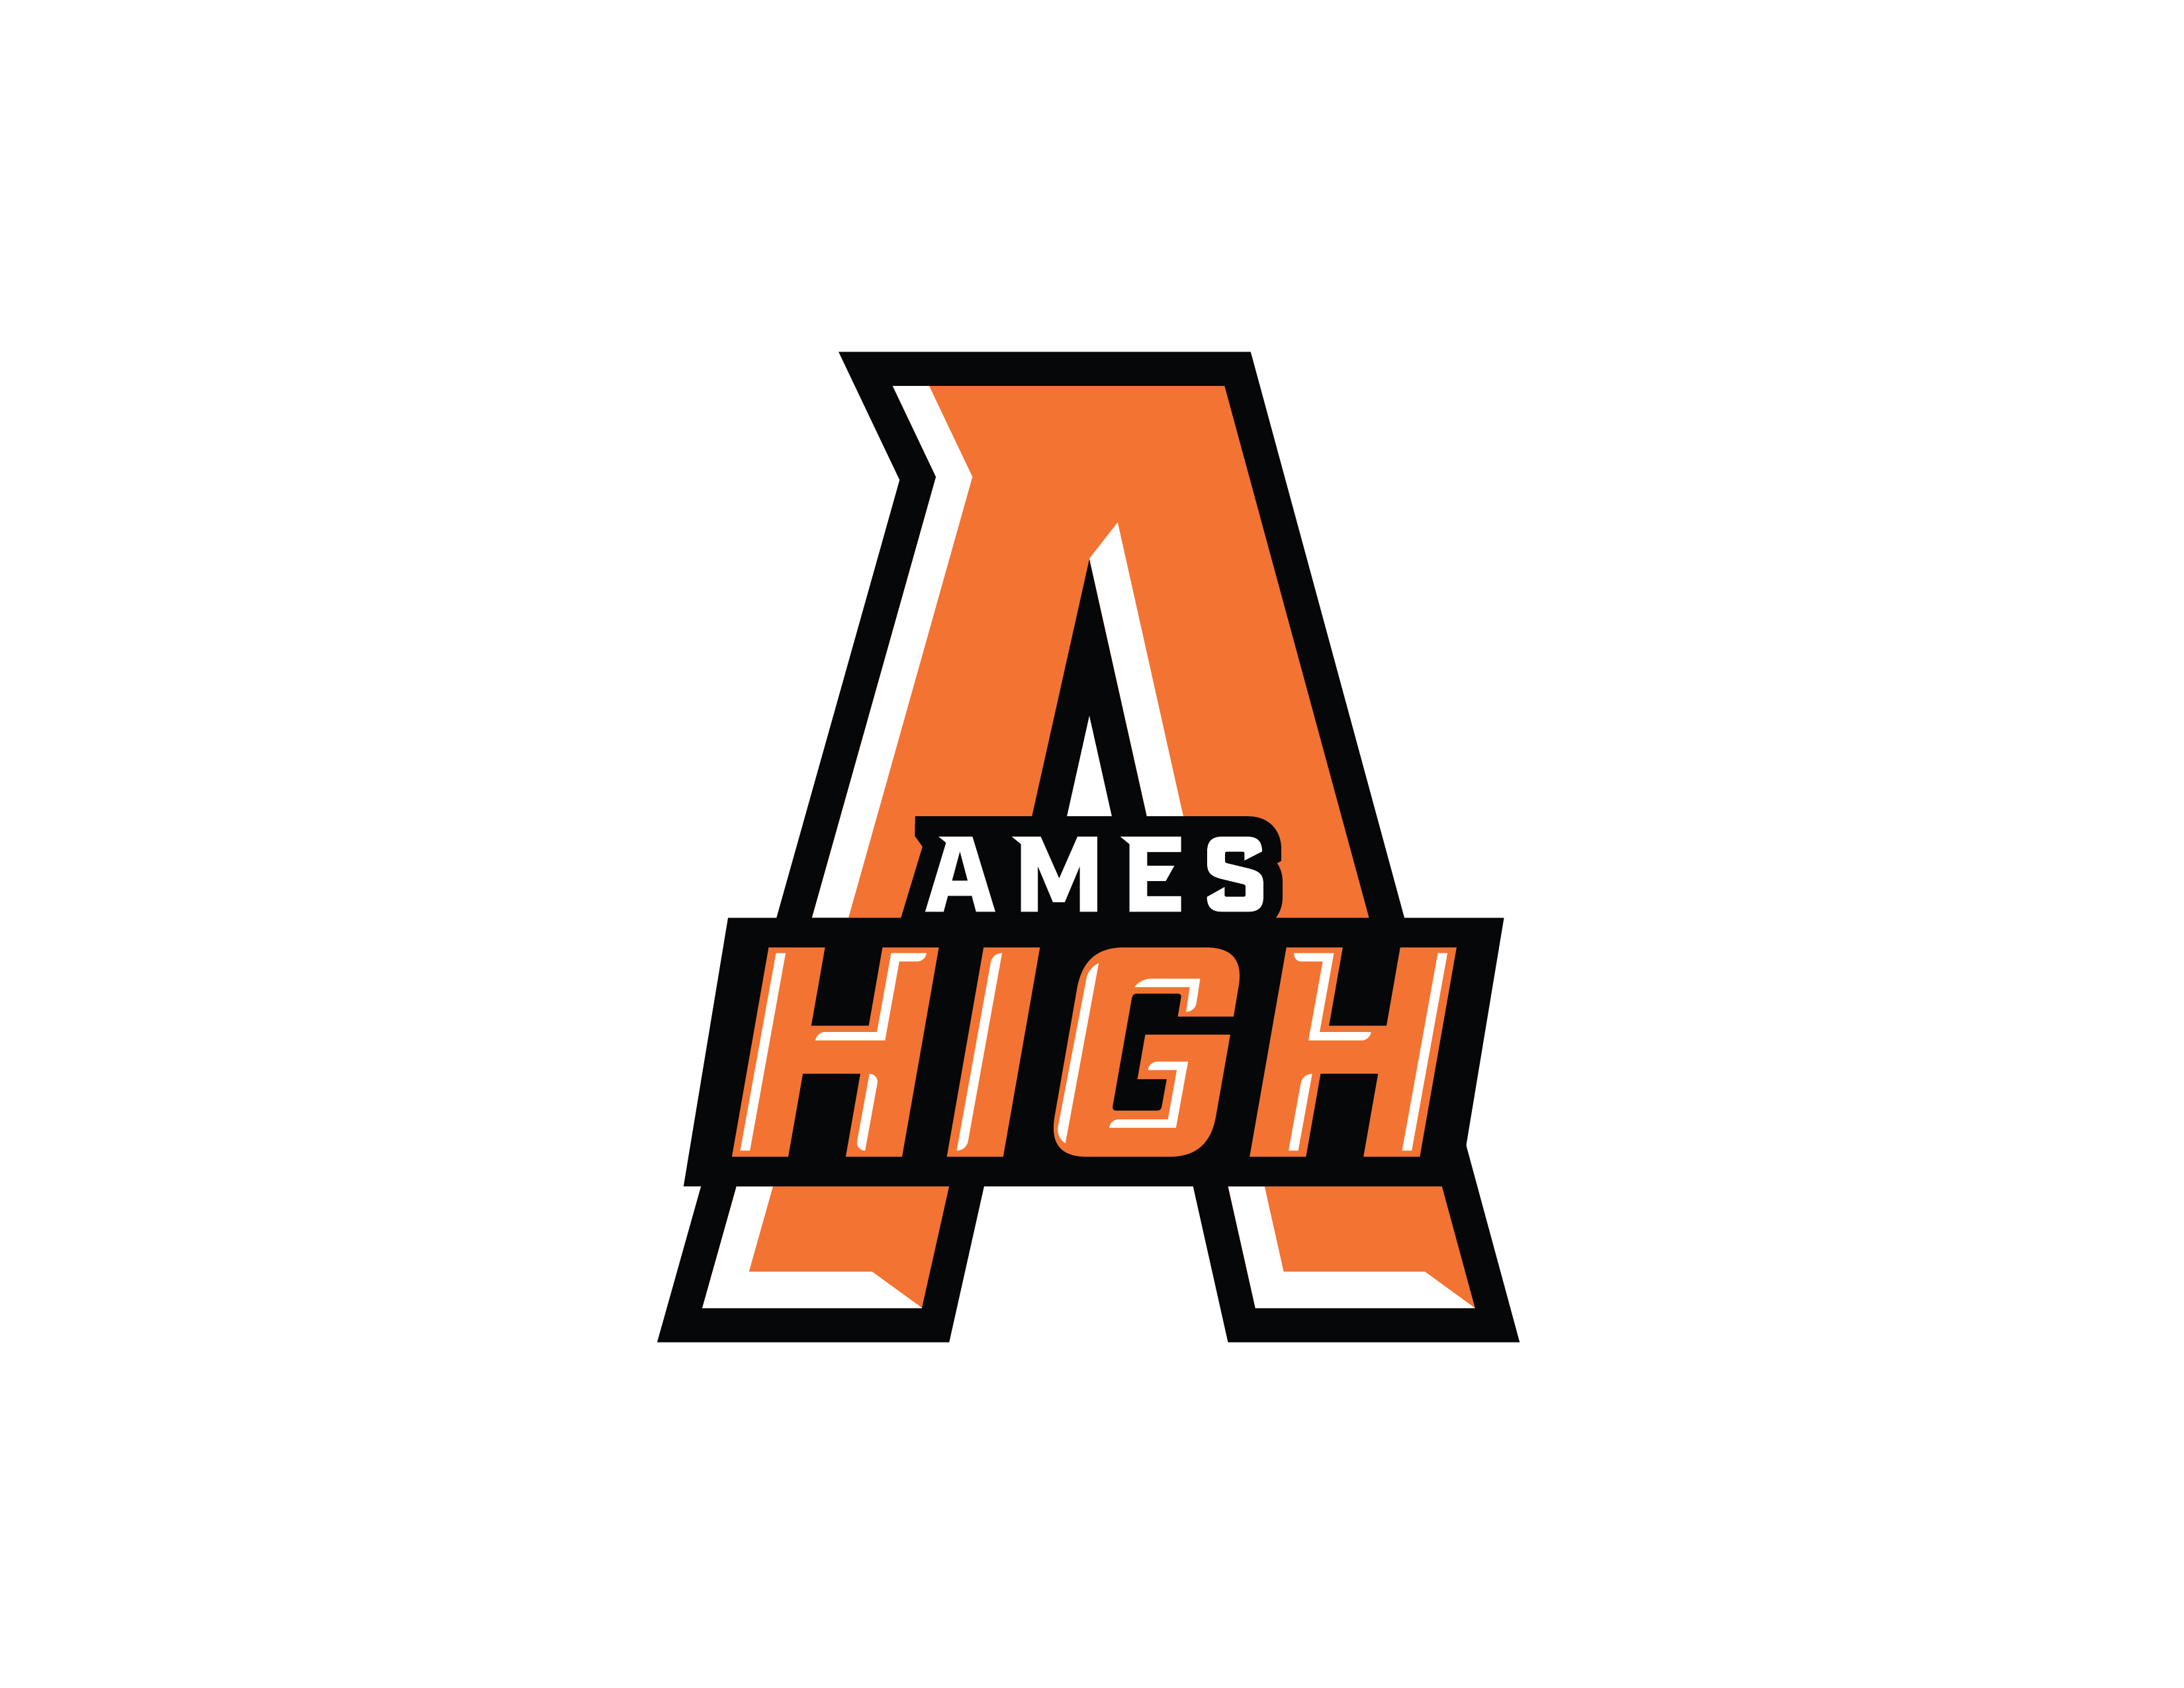 Ames High Logo logo design by logo designer Rippke Design for your inspiration and for the worlds largest logo competition